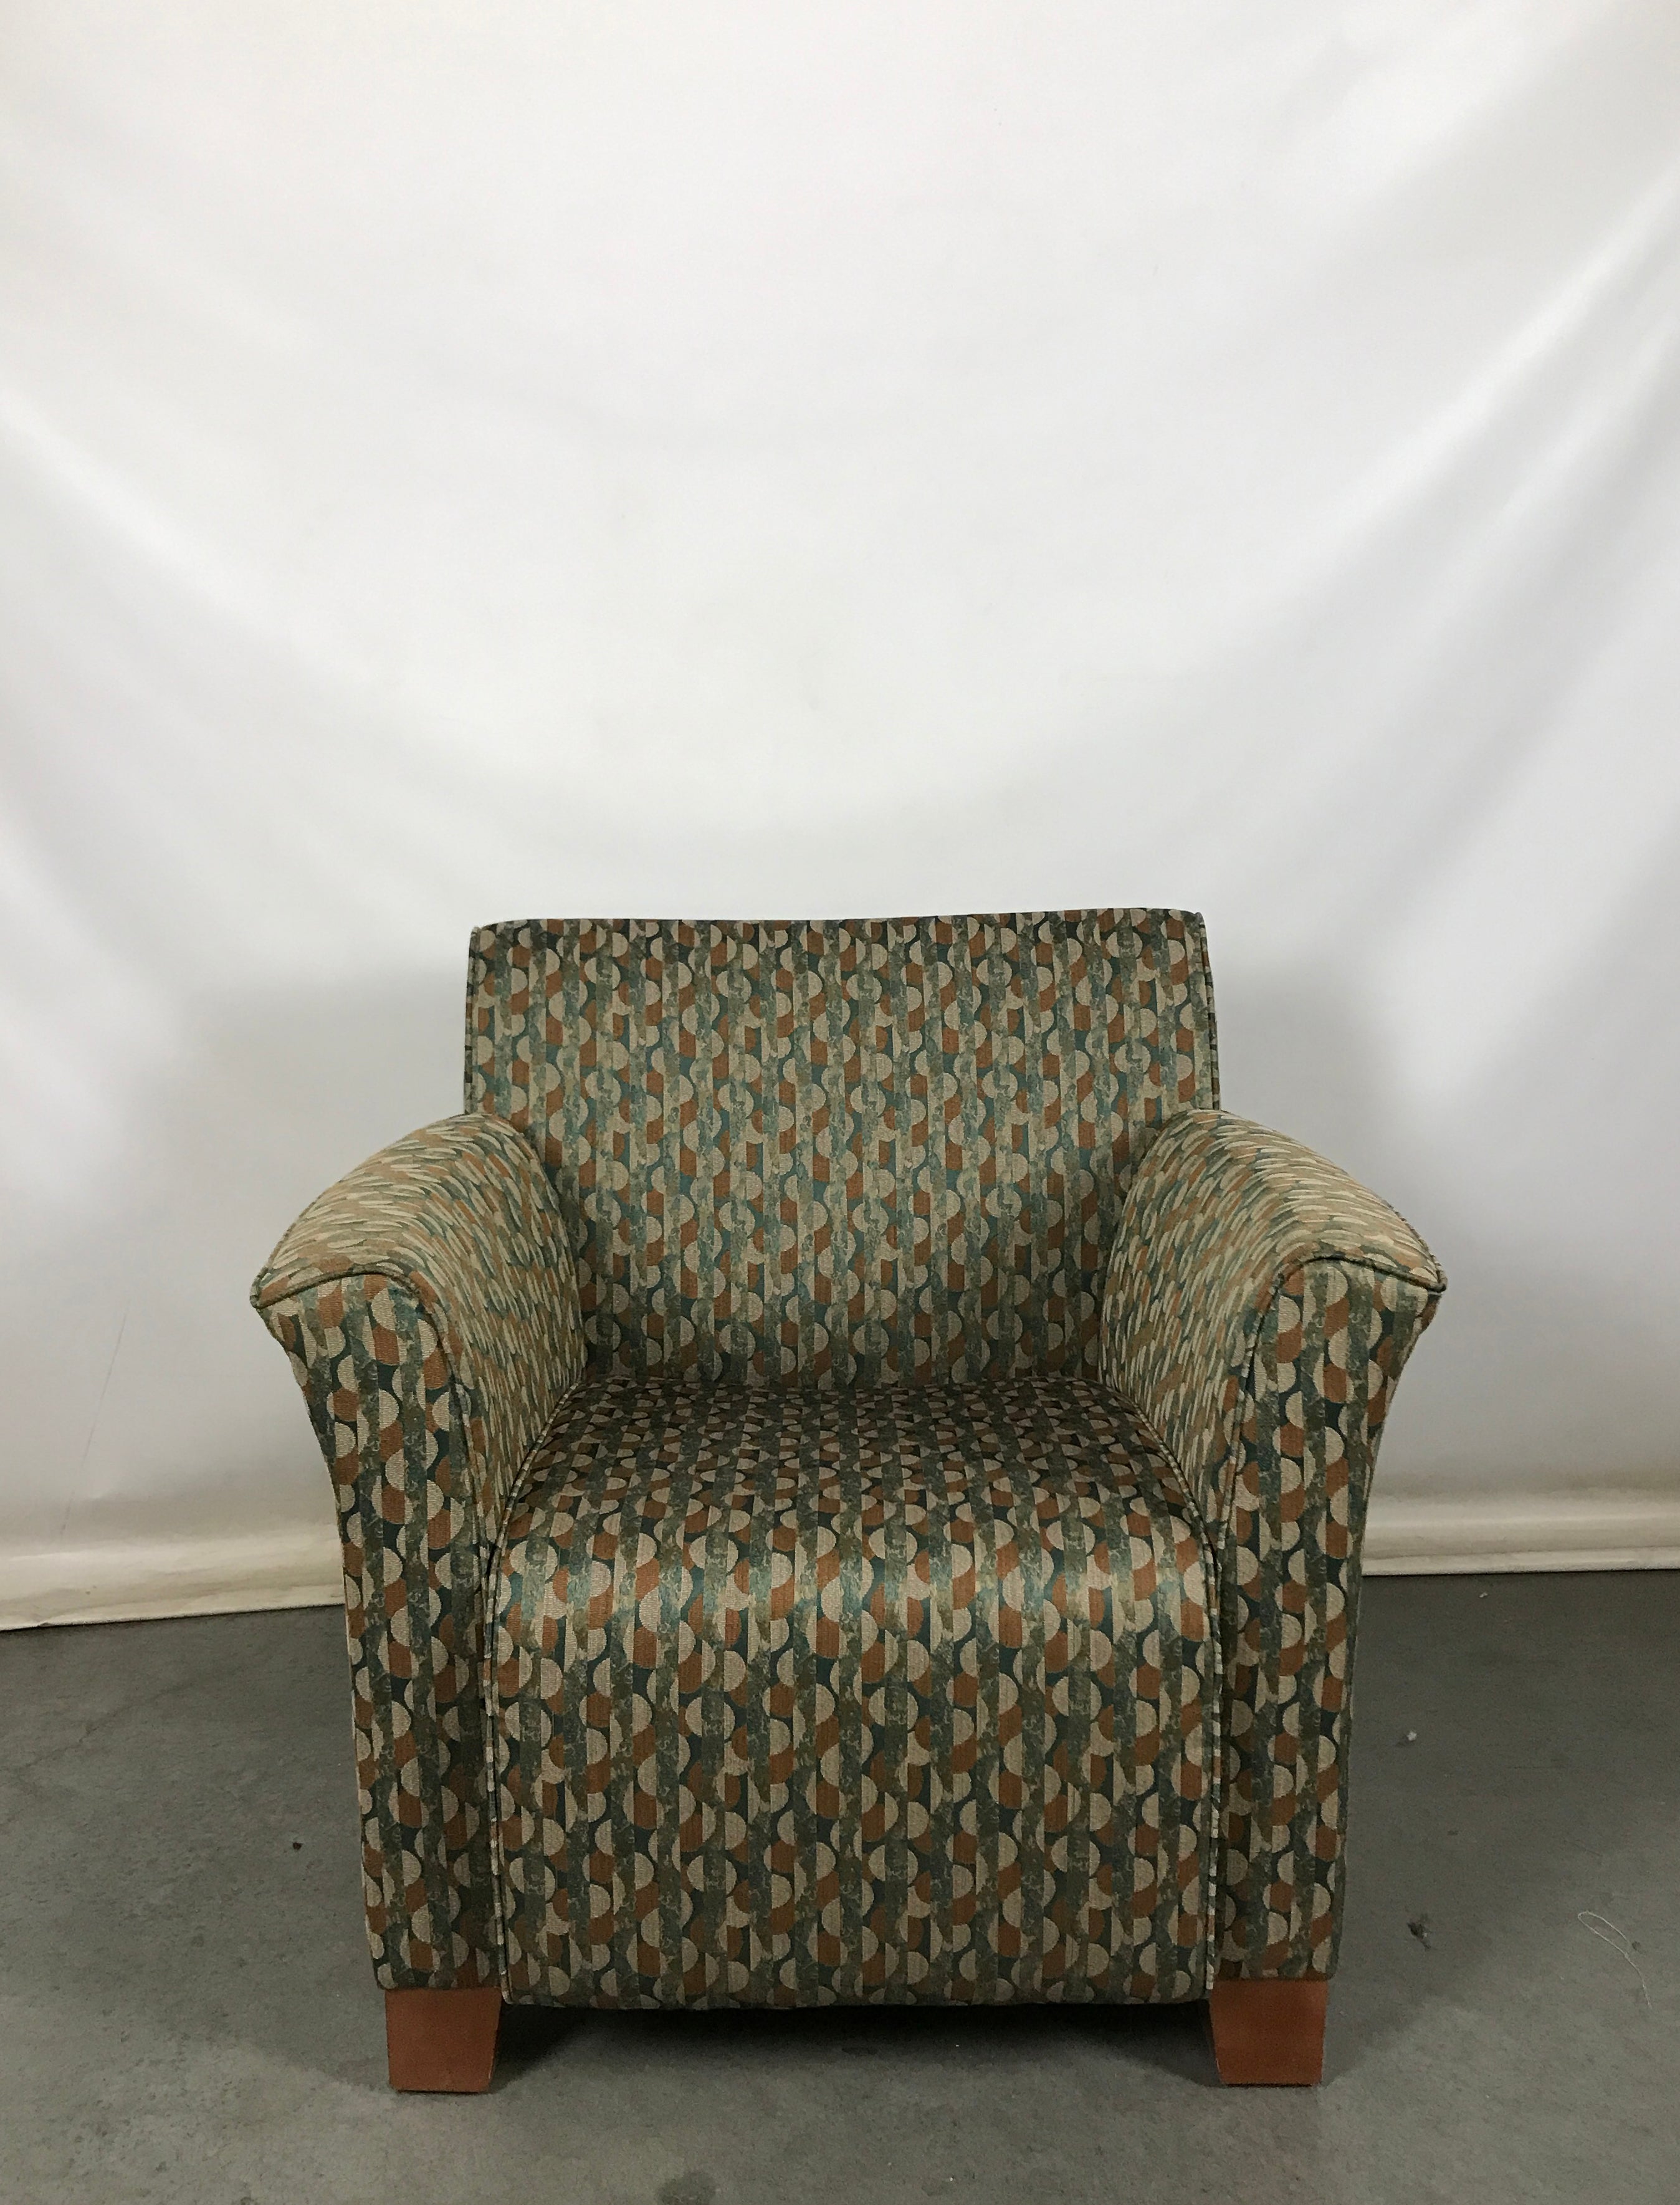 Patterned Cushioned Sofa Chair